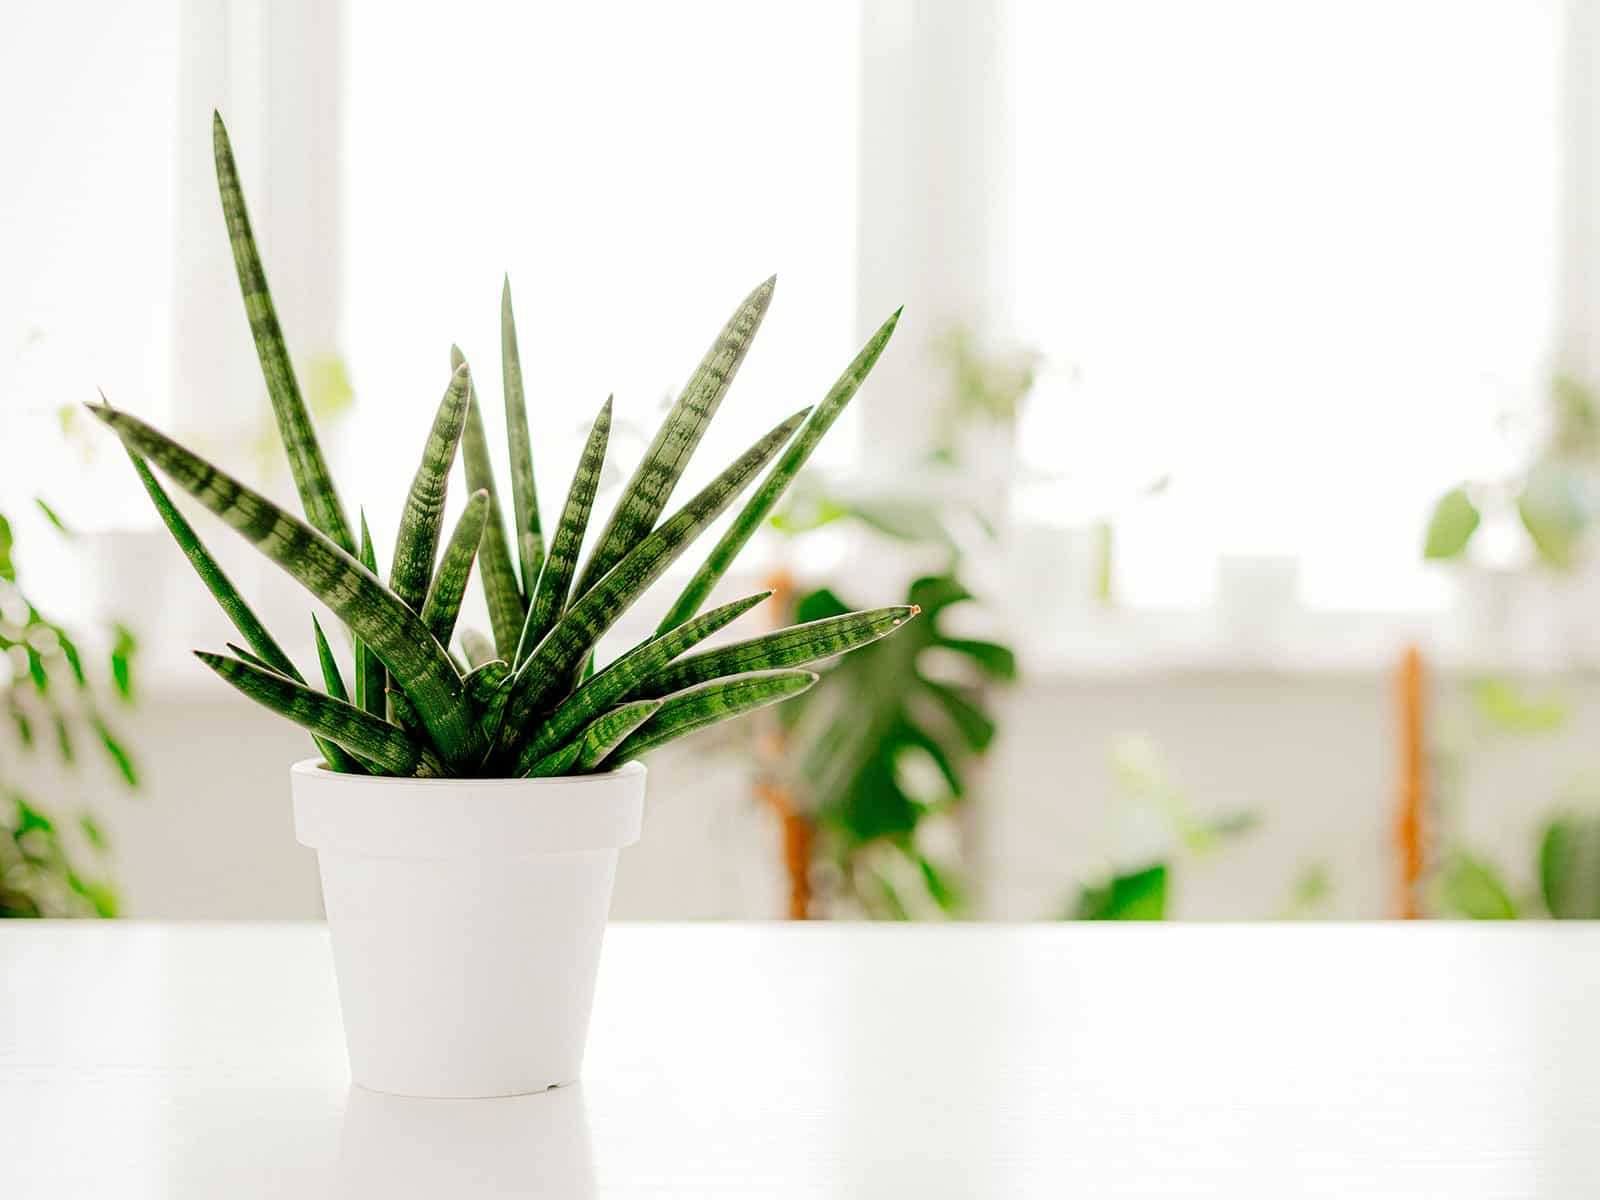 A small Sansevieria cylindrica houseplant in a white pot on a white table with plants blurred out in the background